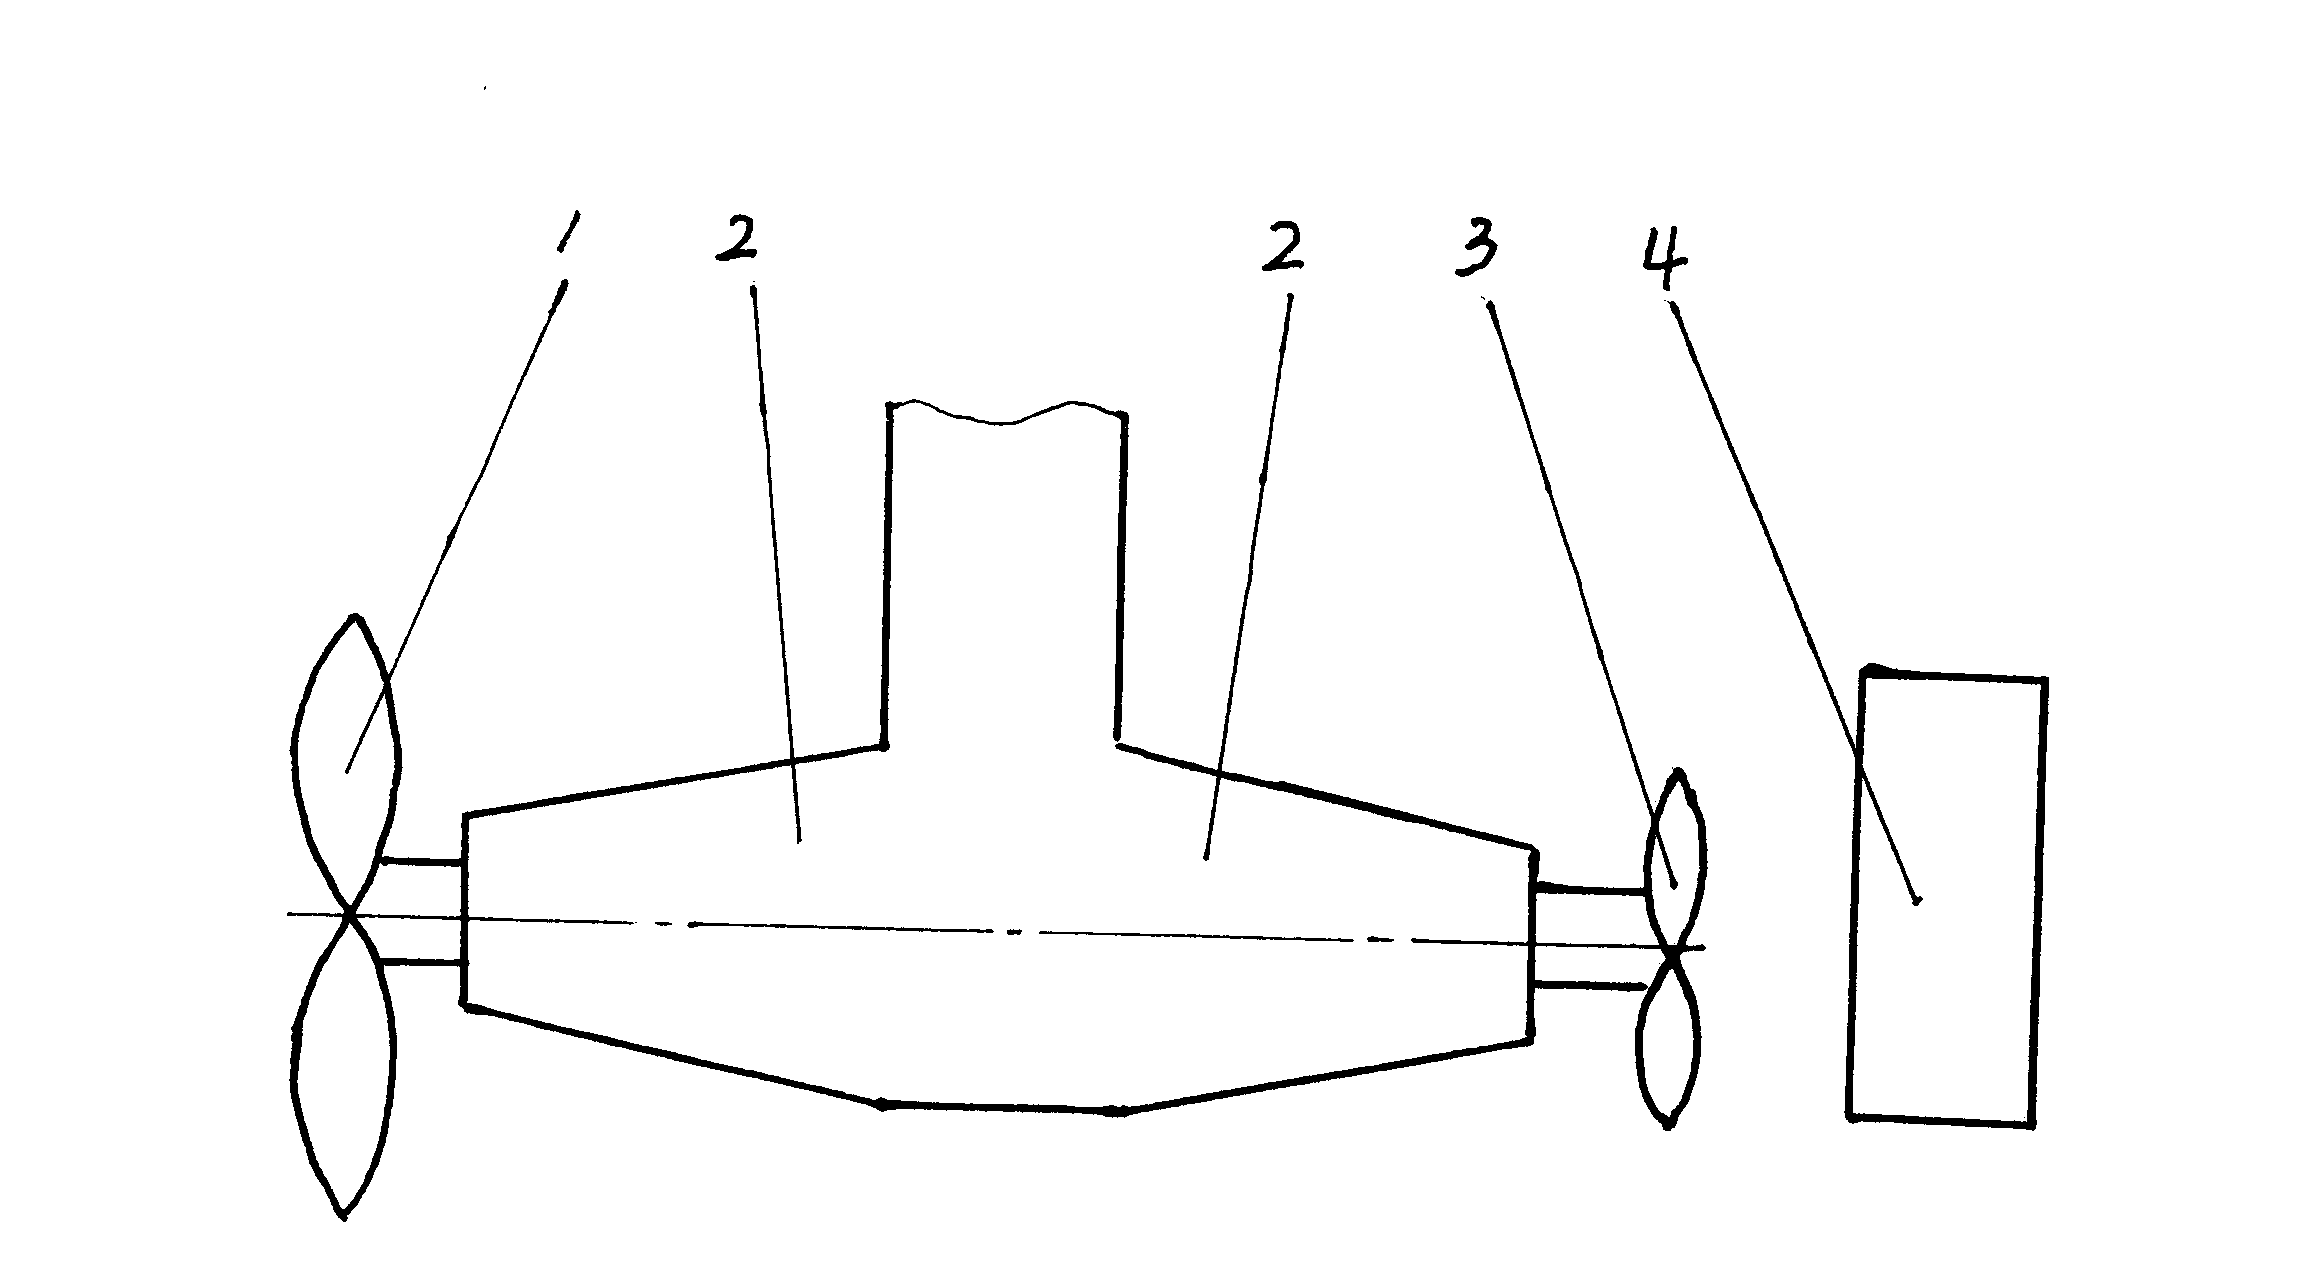 Twin-screw propelling device for ship